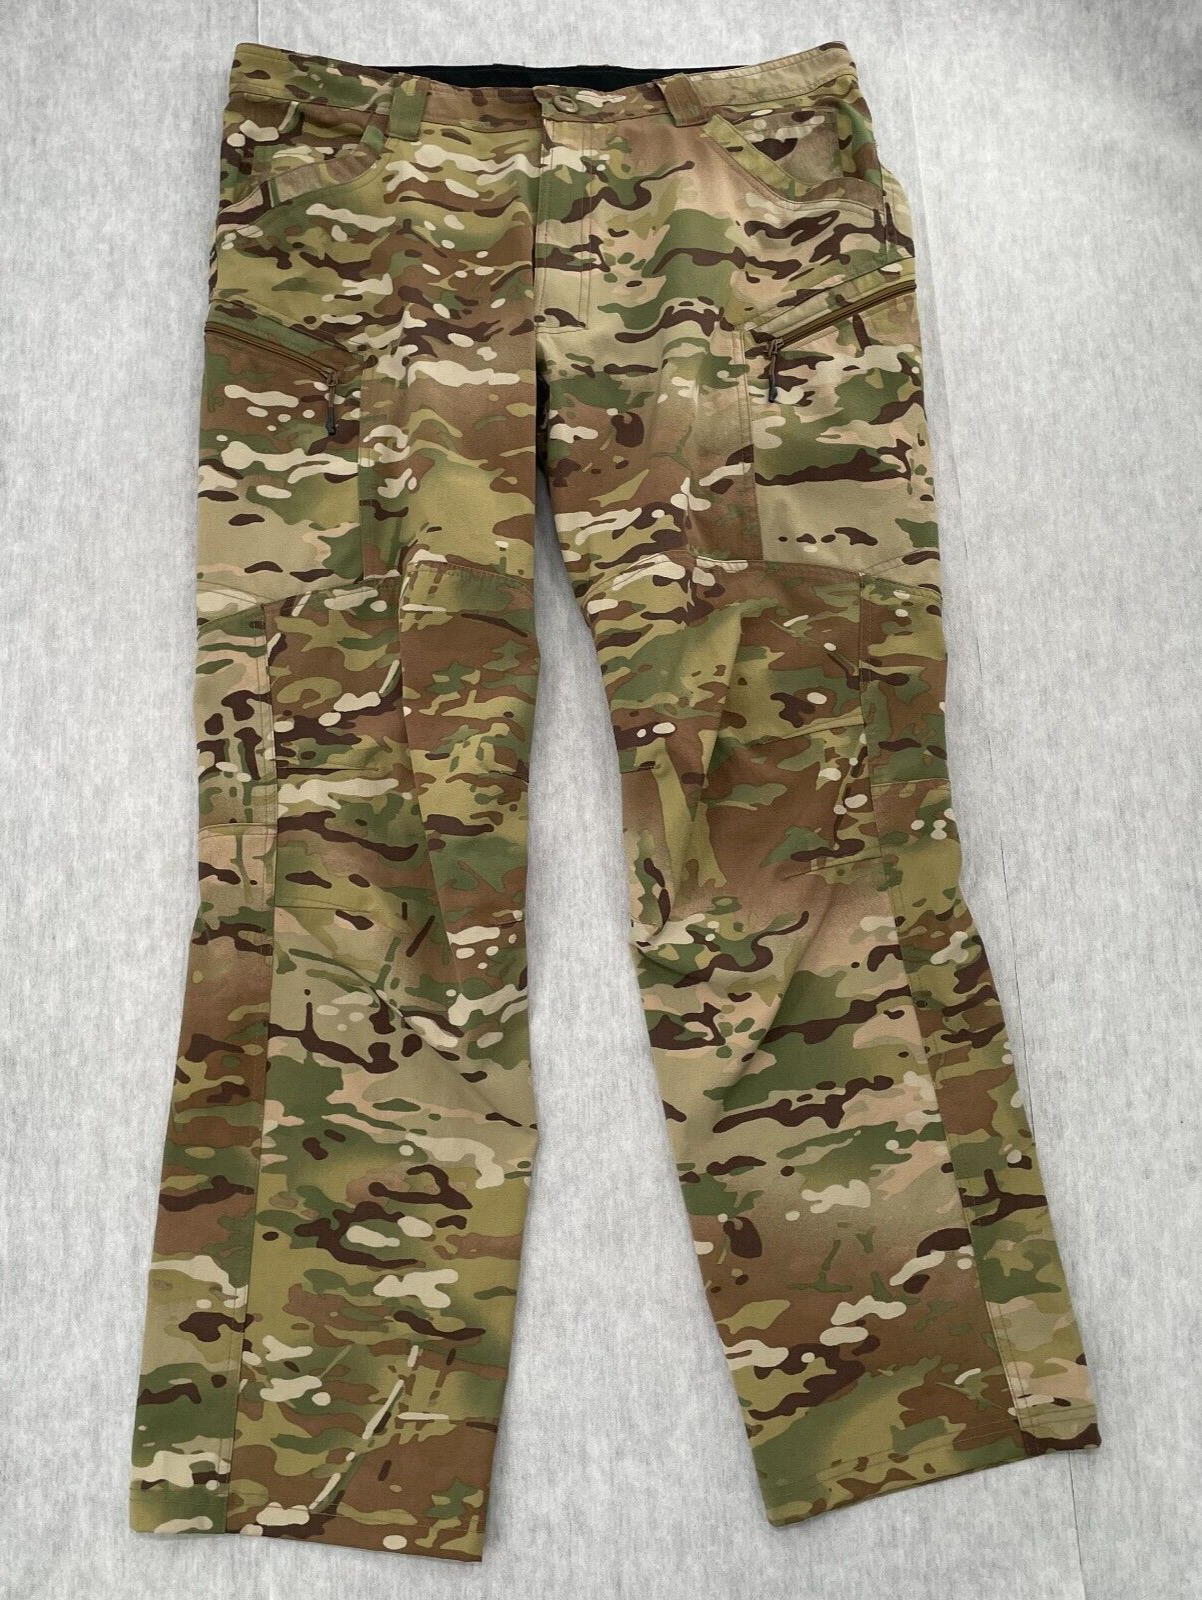 Beyond Clothing Pants Adult Extra Large Green Camo Pockets Made In USA Mens XL